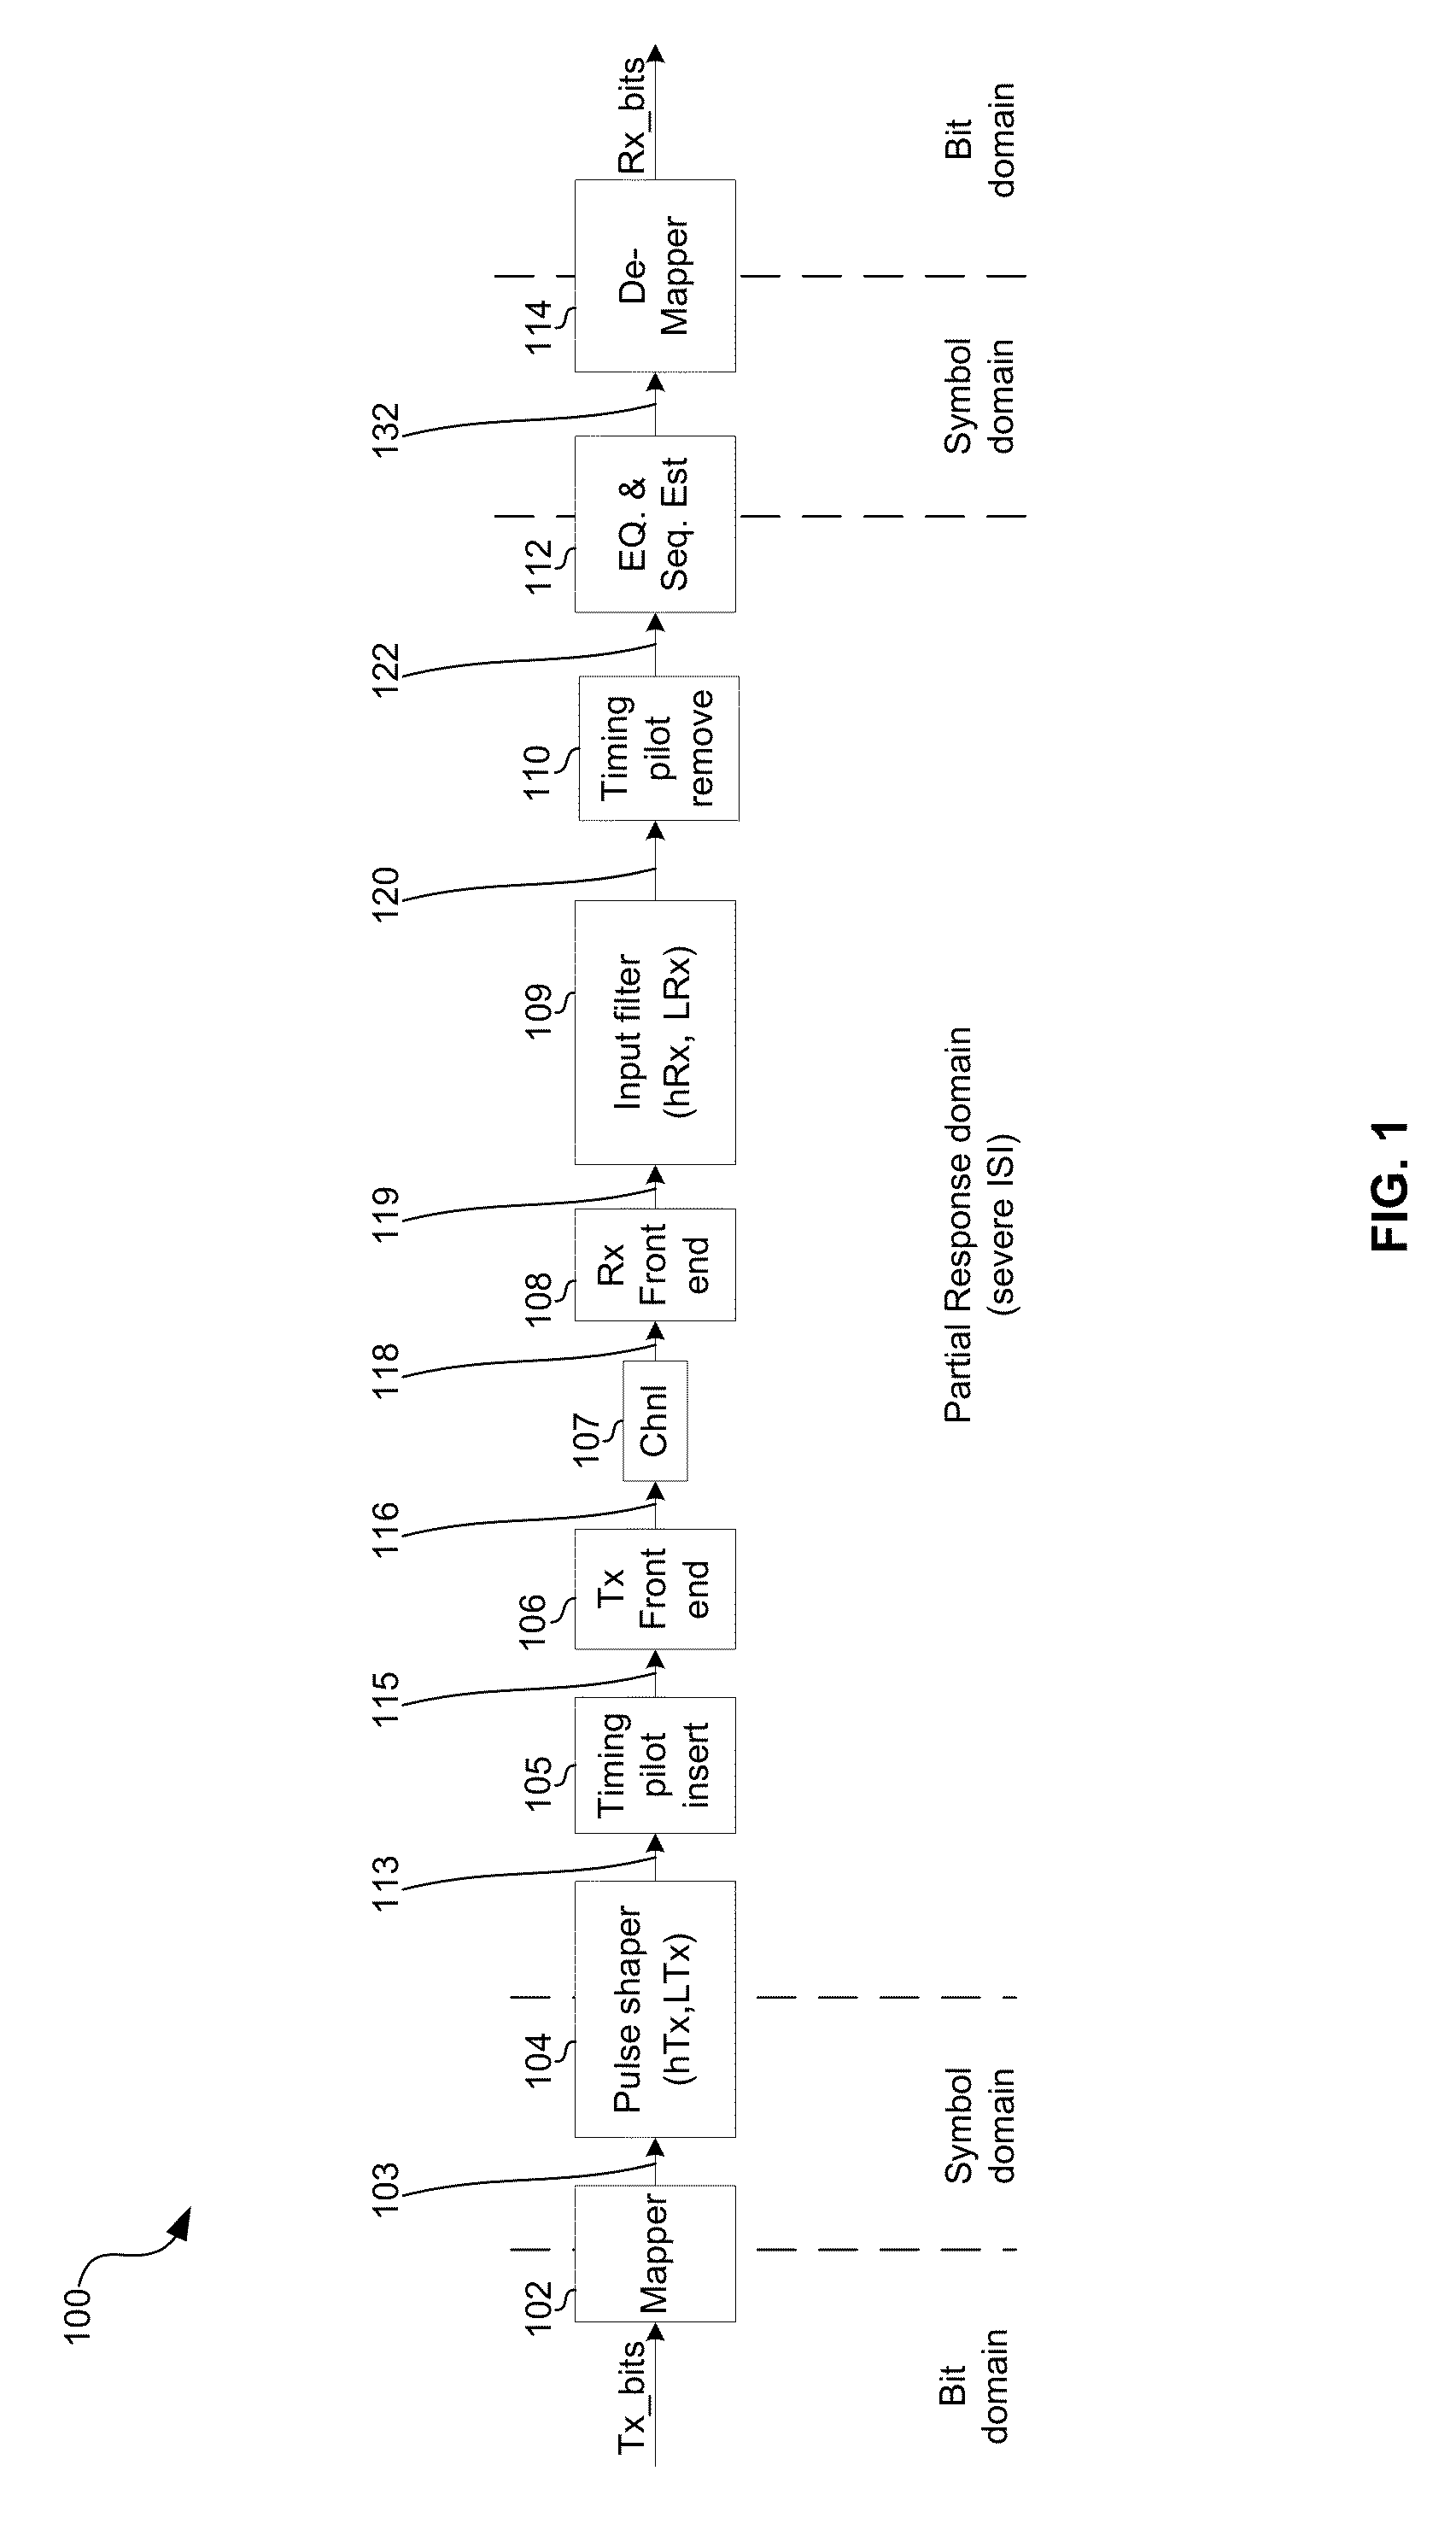 Highly-spectrally-efficient receiver